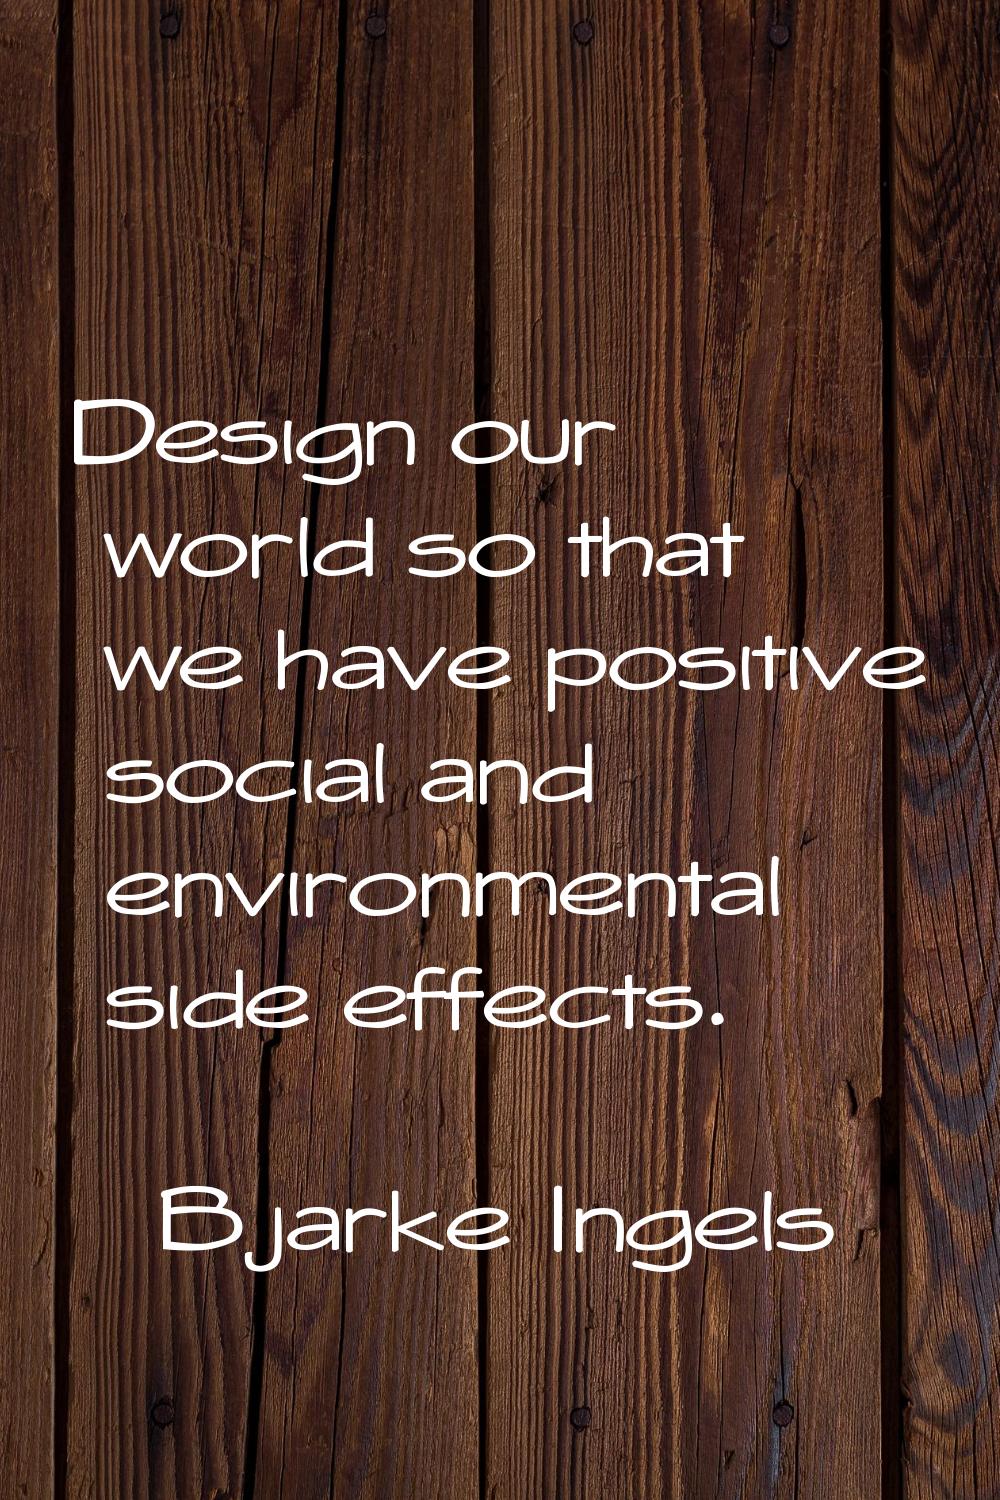 Design our world so that we have positive social and environmental side effects.